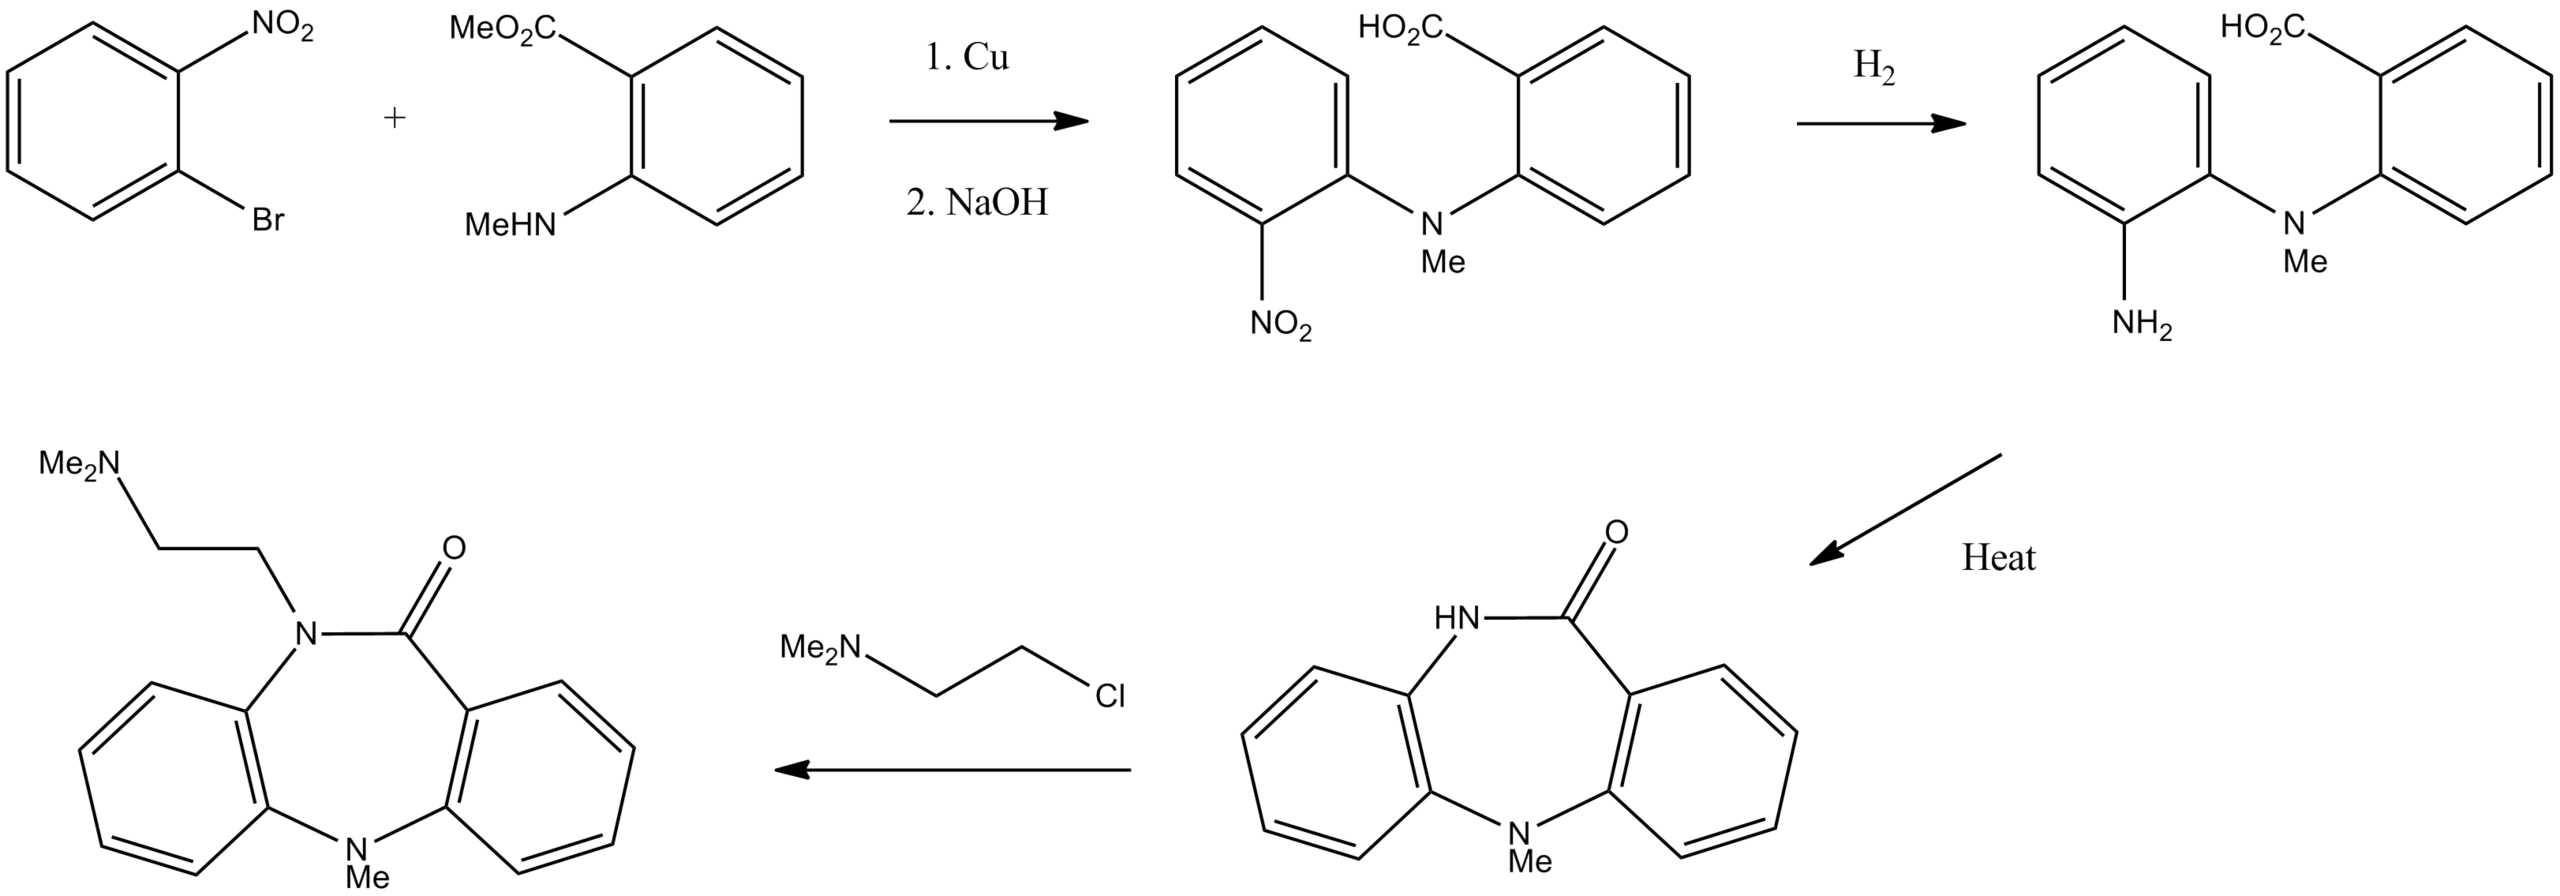 File:Dibenzepin synthesis.png